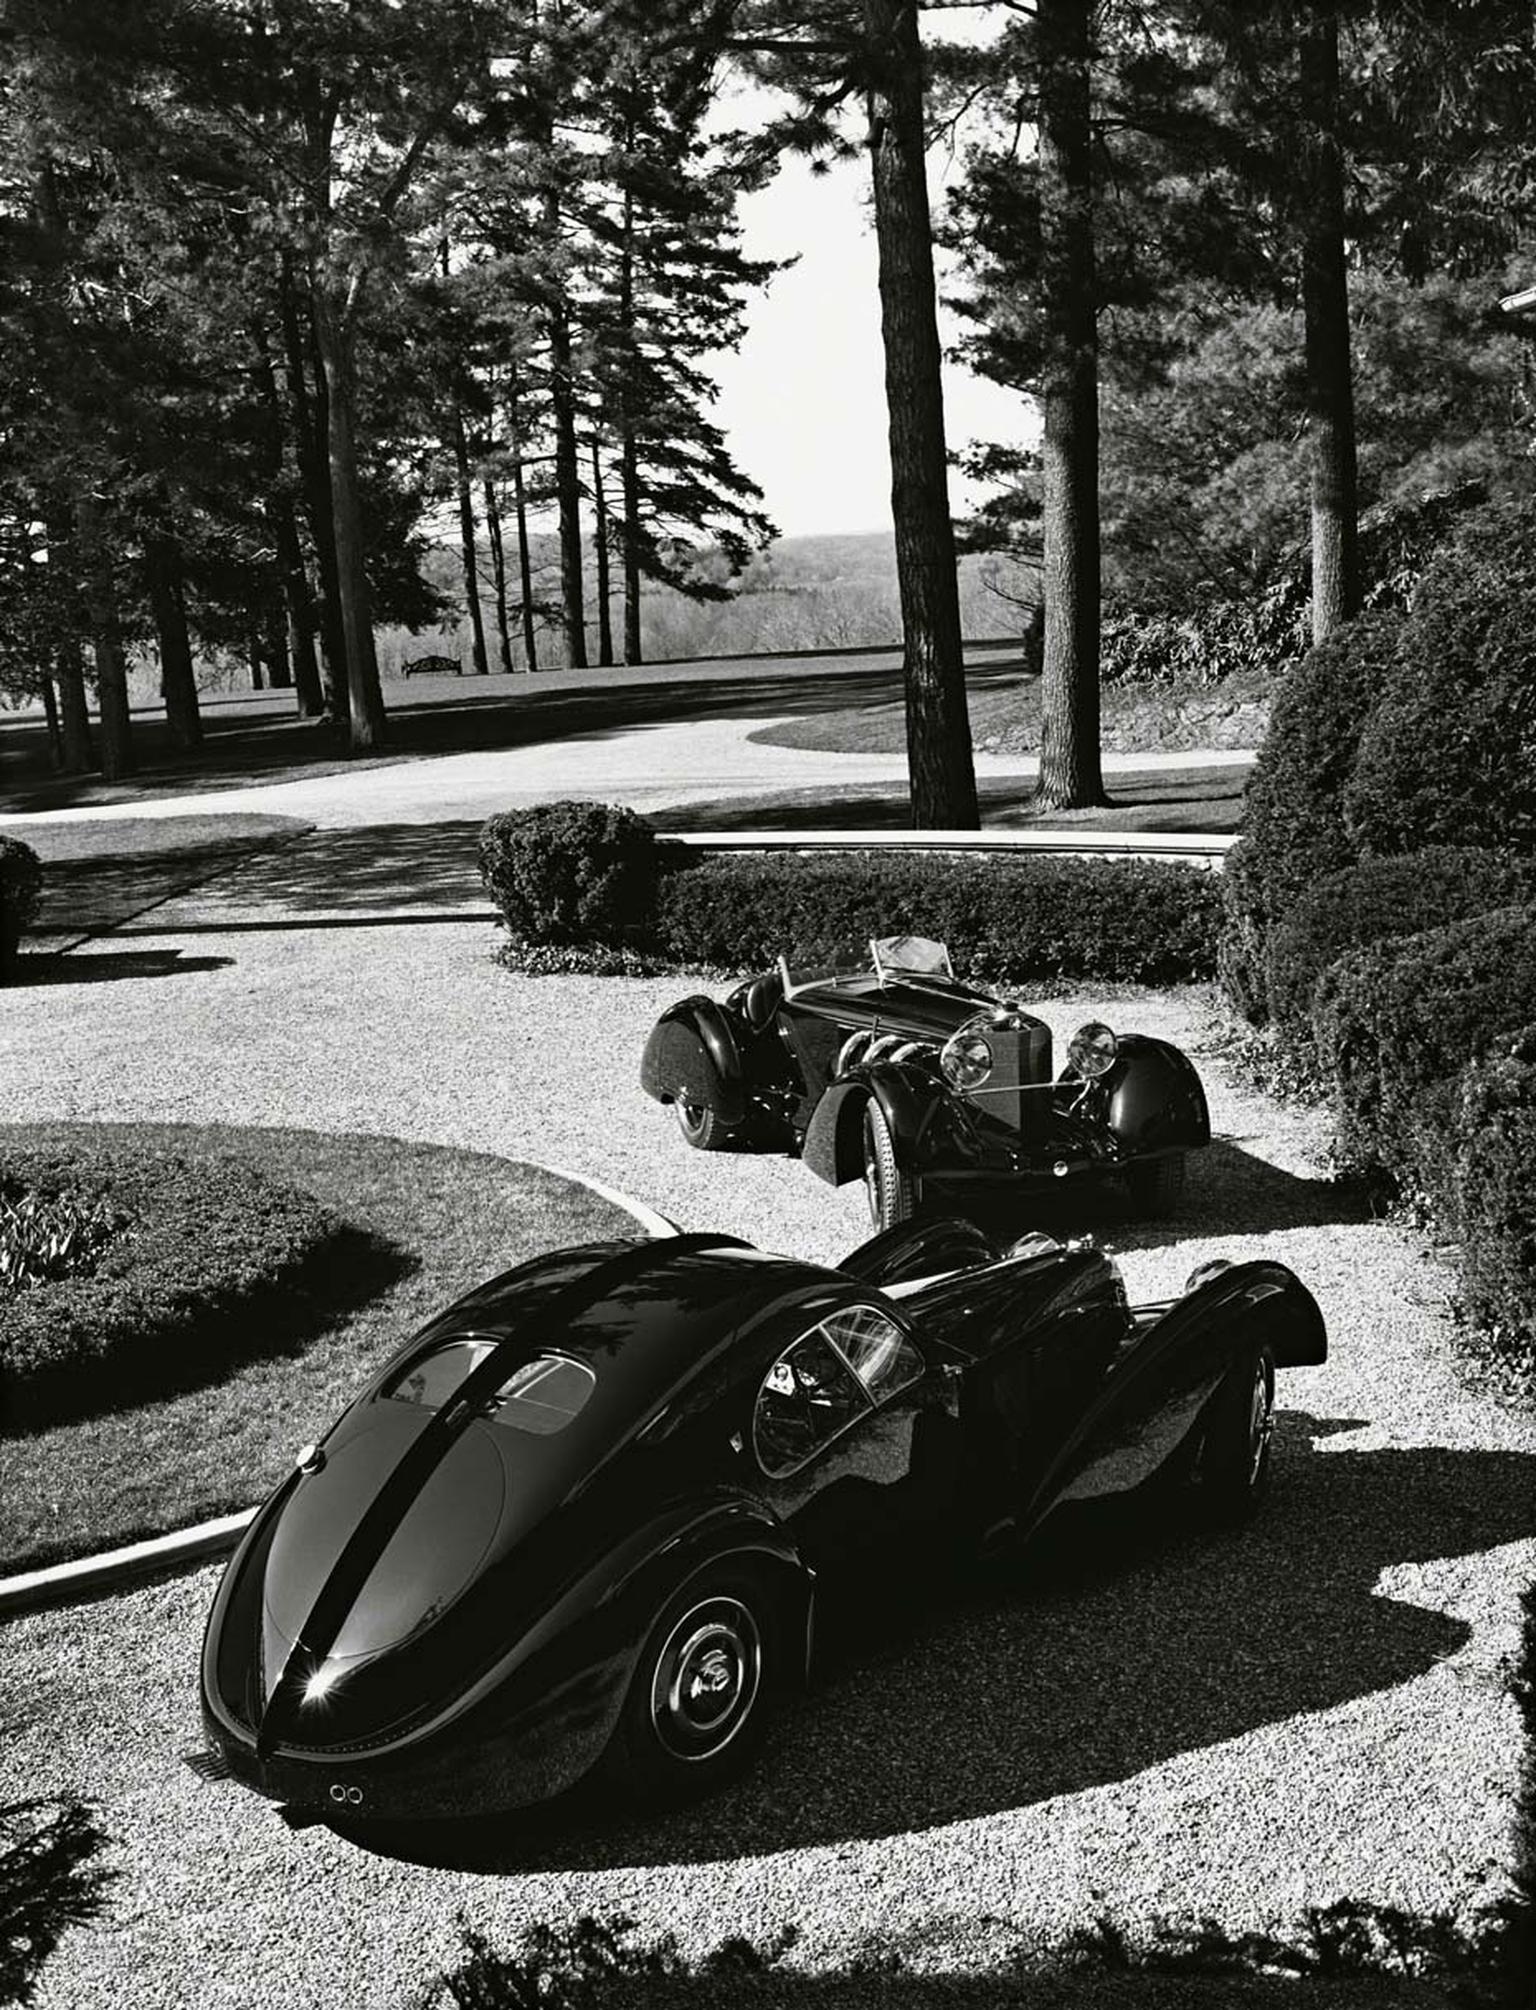 The black Bugatti 57CS Atlantic Coupé, built in 1938, just a year before the designer’s birth, is an amazing creature with curves reminiscent of a Hollywood pin-up.